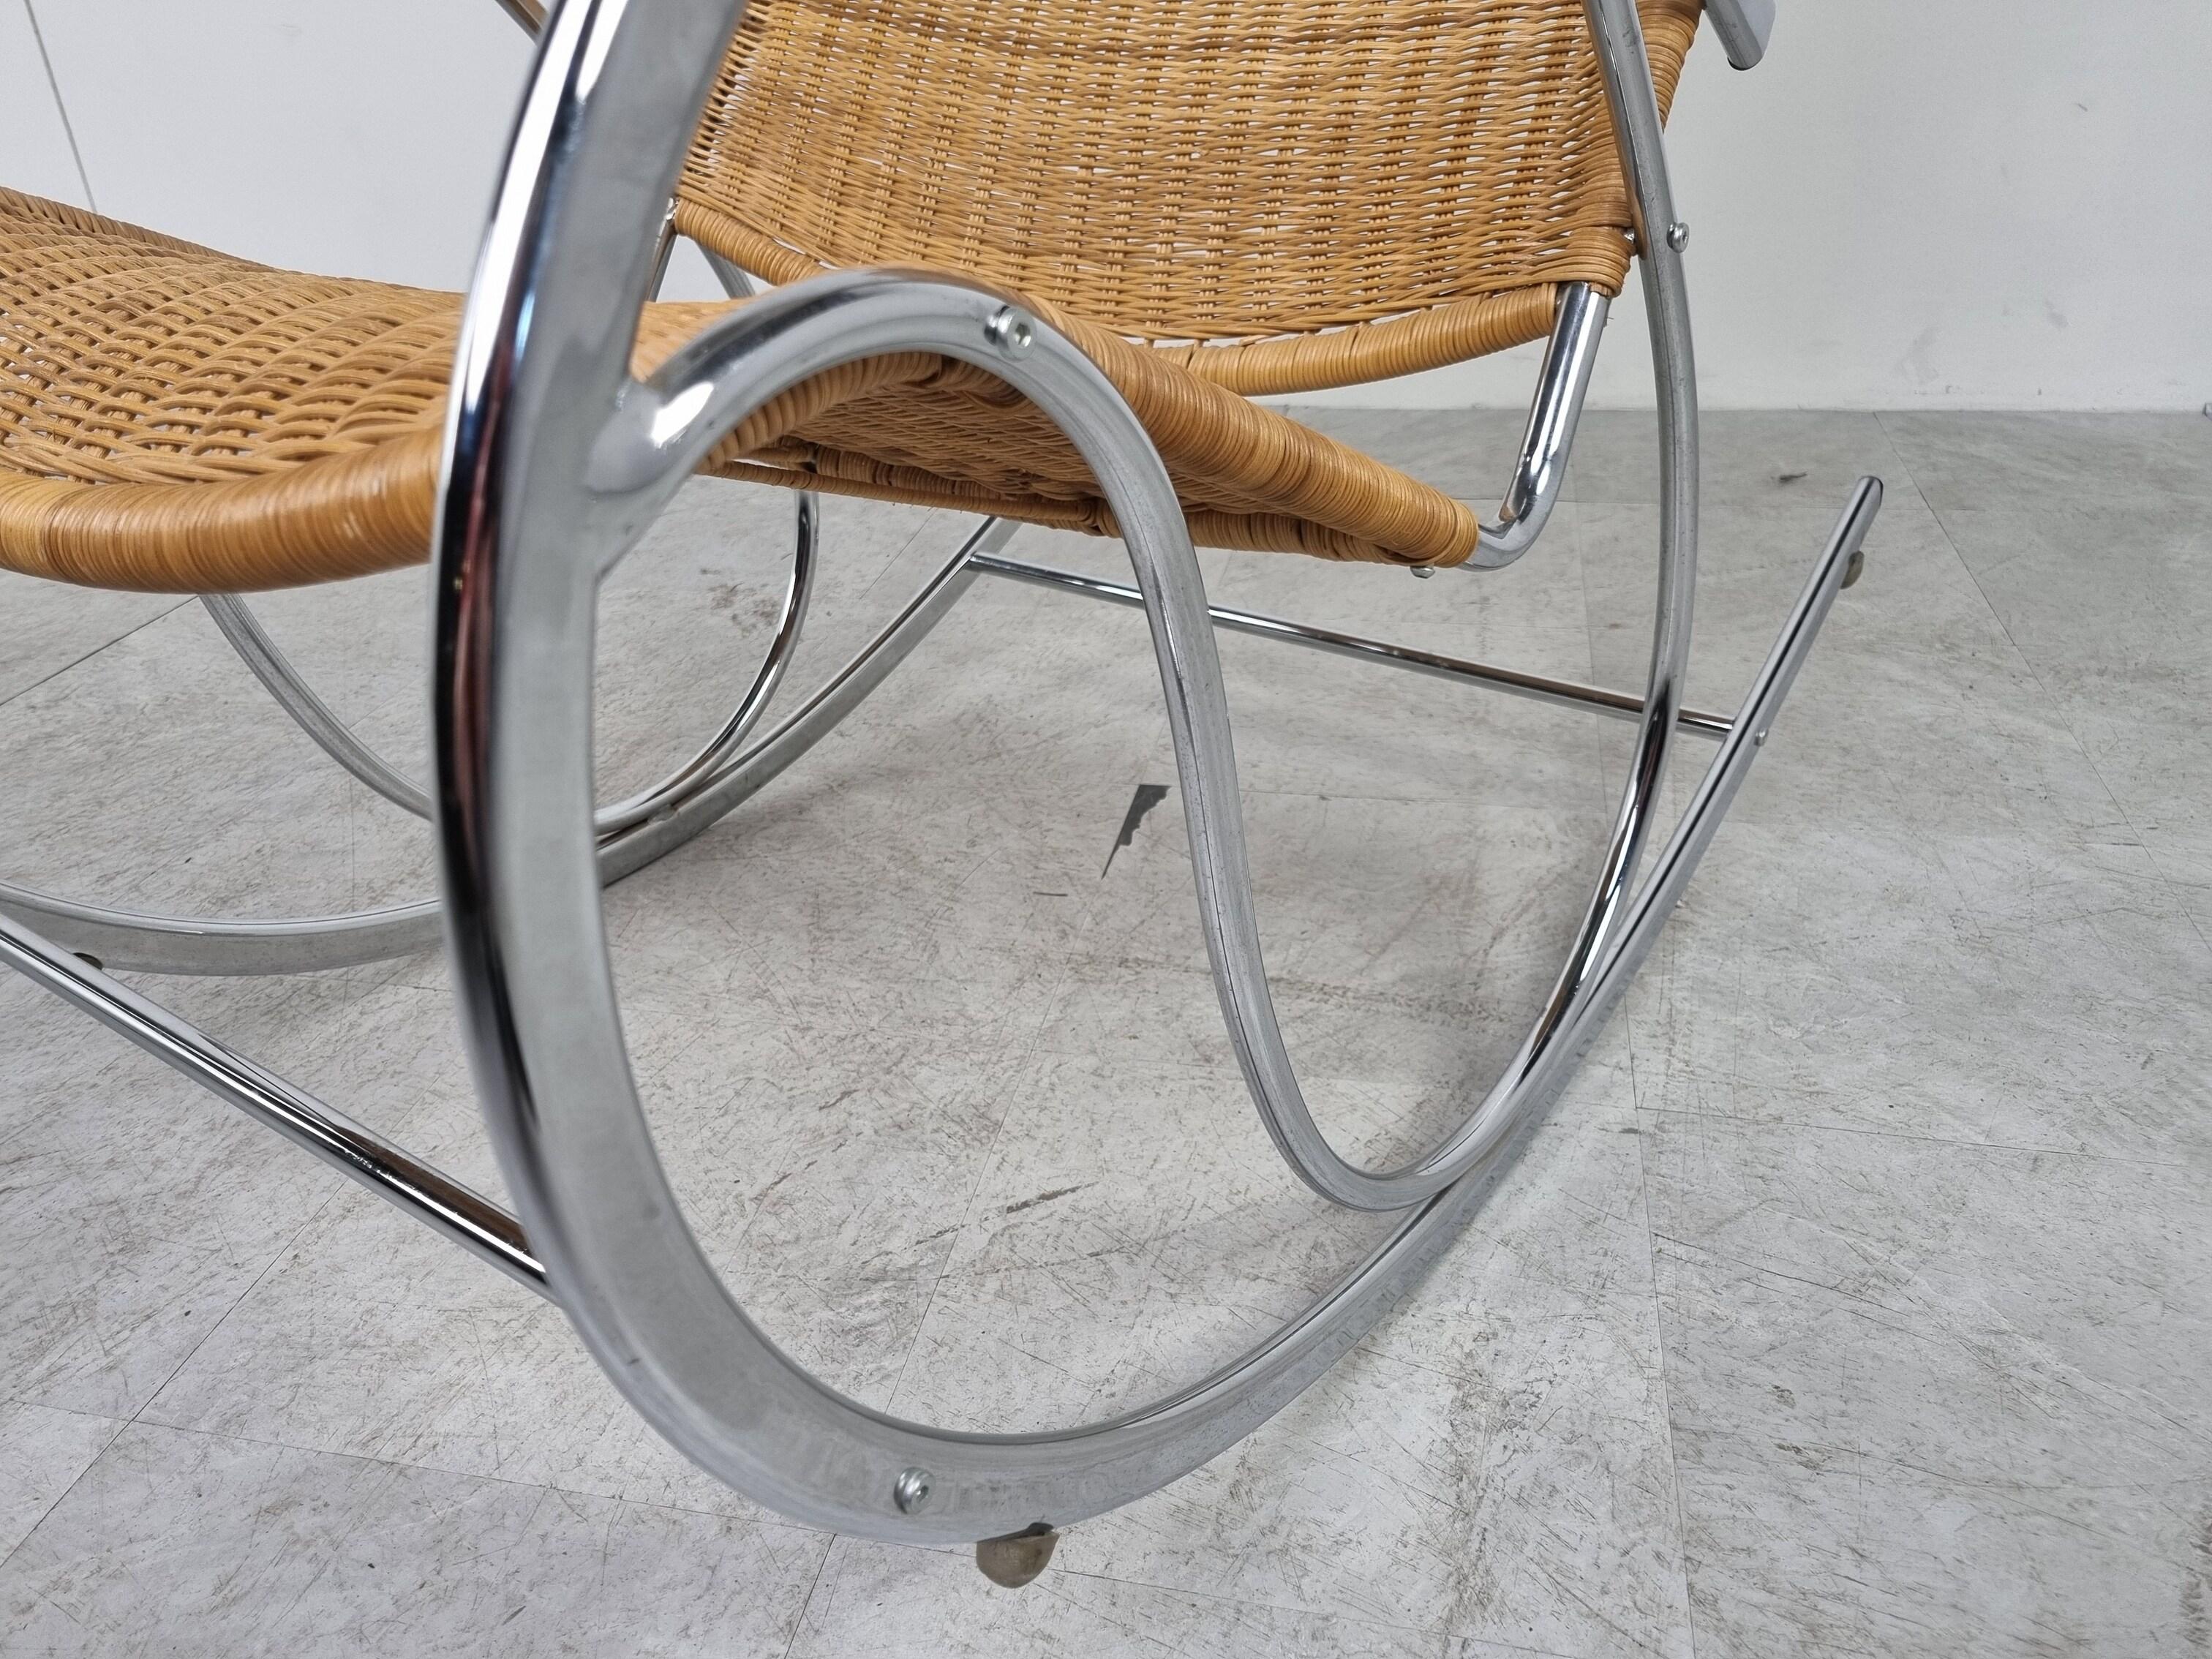 Vintage bauhaus inspired rocking chair made from wicker and chrome.

Beautiful elegant design with beech wooden armrests.

Good condition, some wear on the armrests.

Very sturdy.

1970s - Italy

Measures: Height: 103cm/40.55